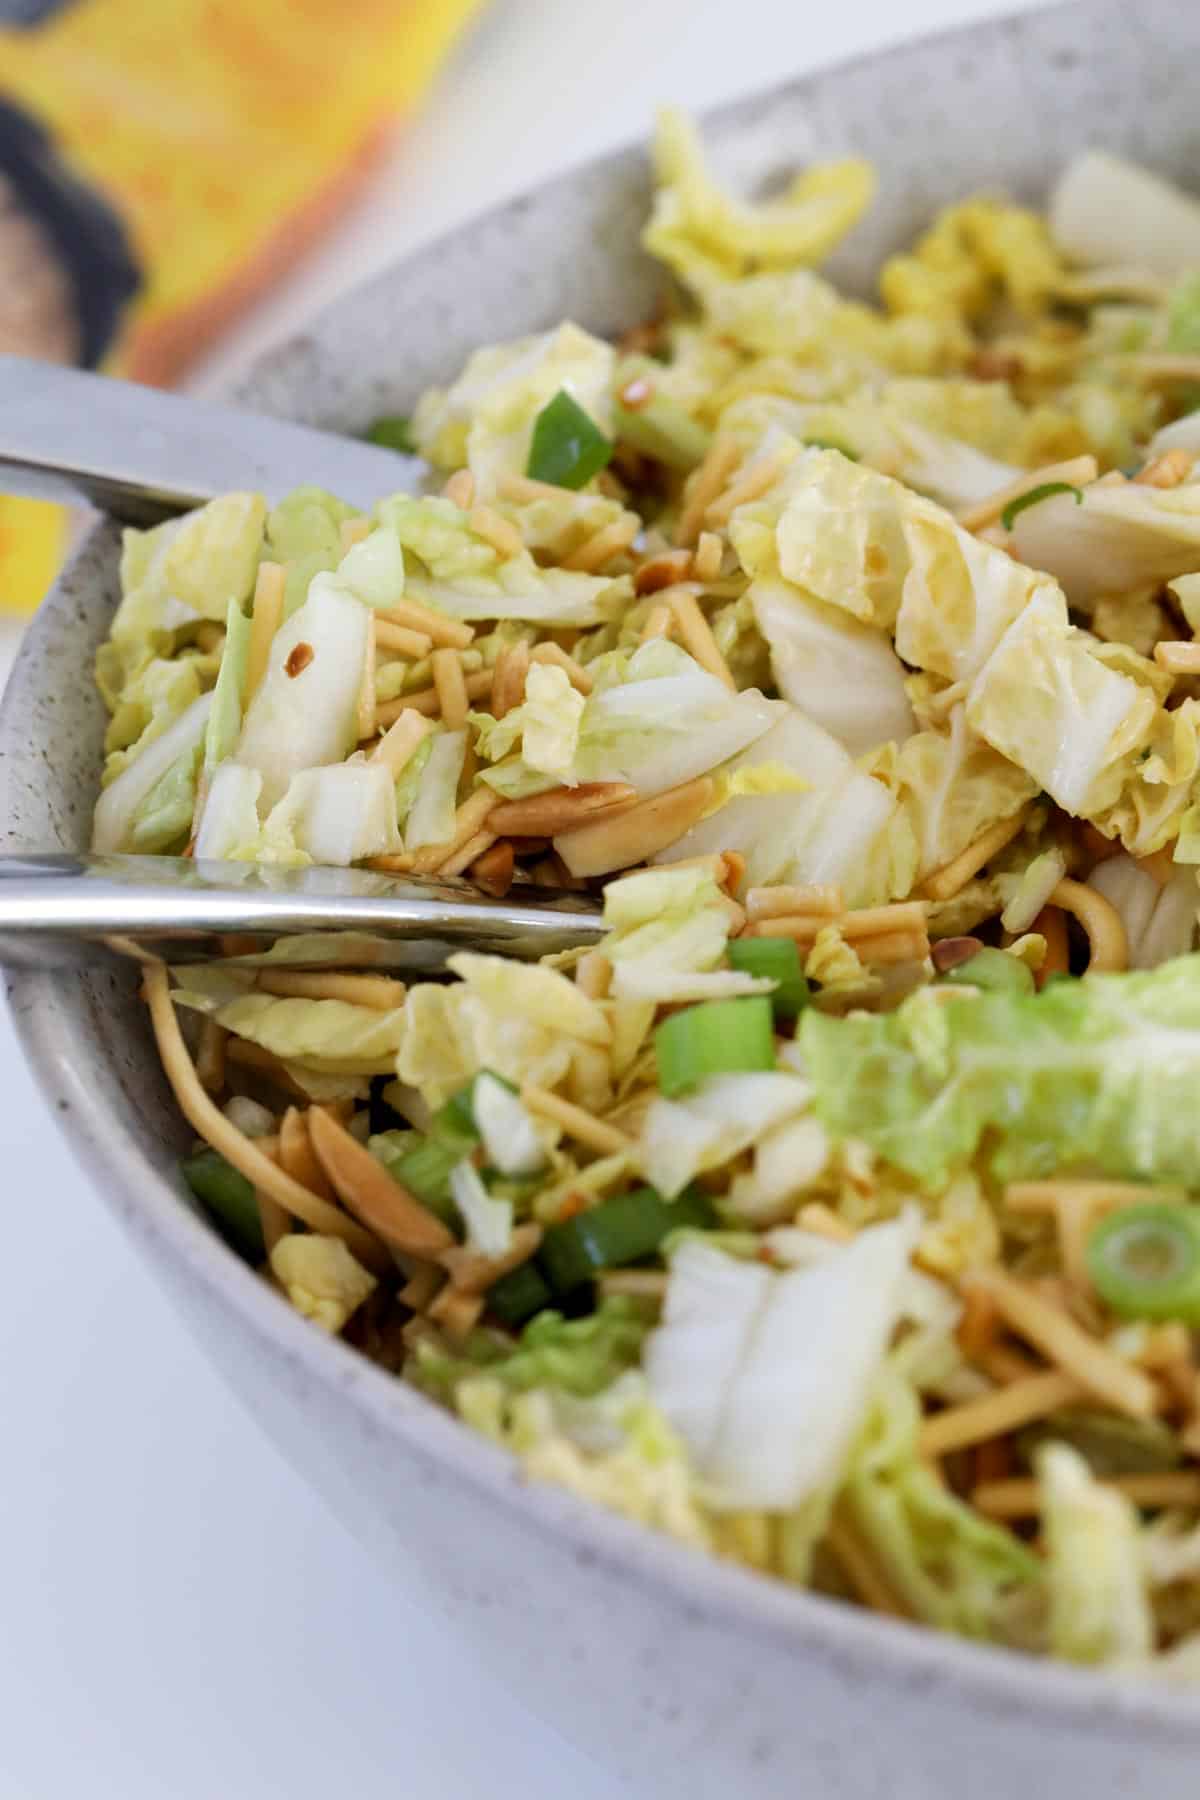 A bowl of cabbage salad topped with crunchy noodles.